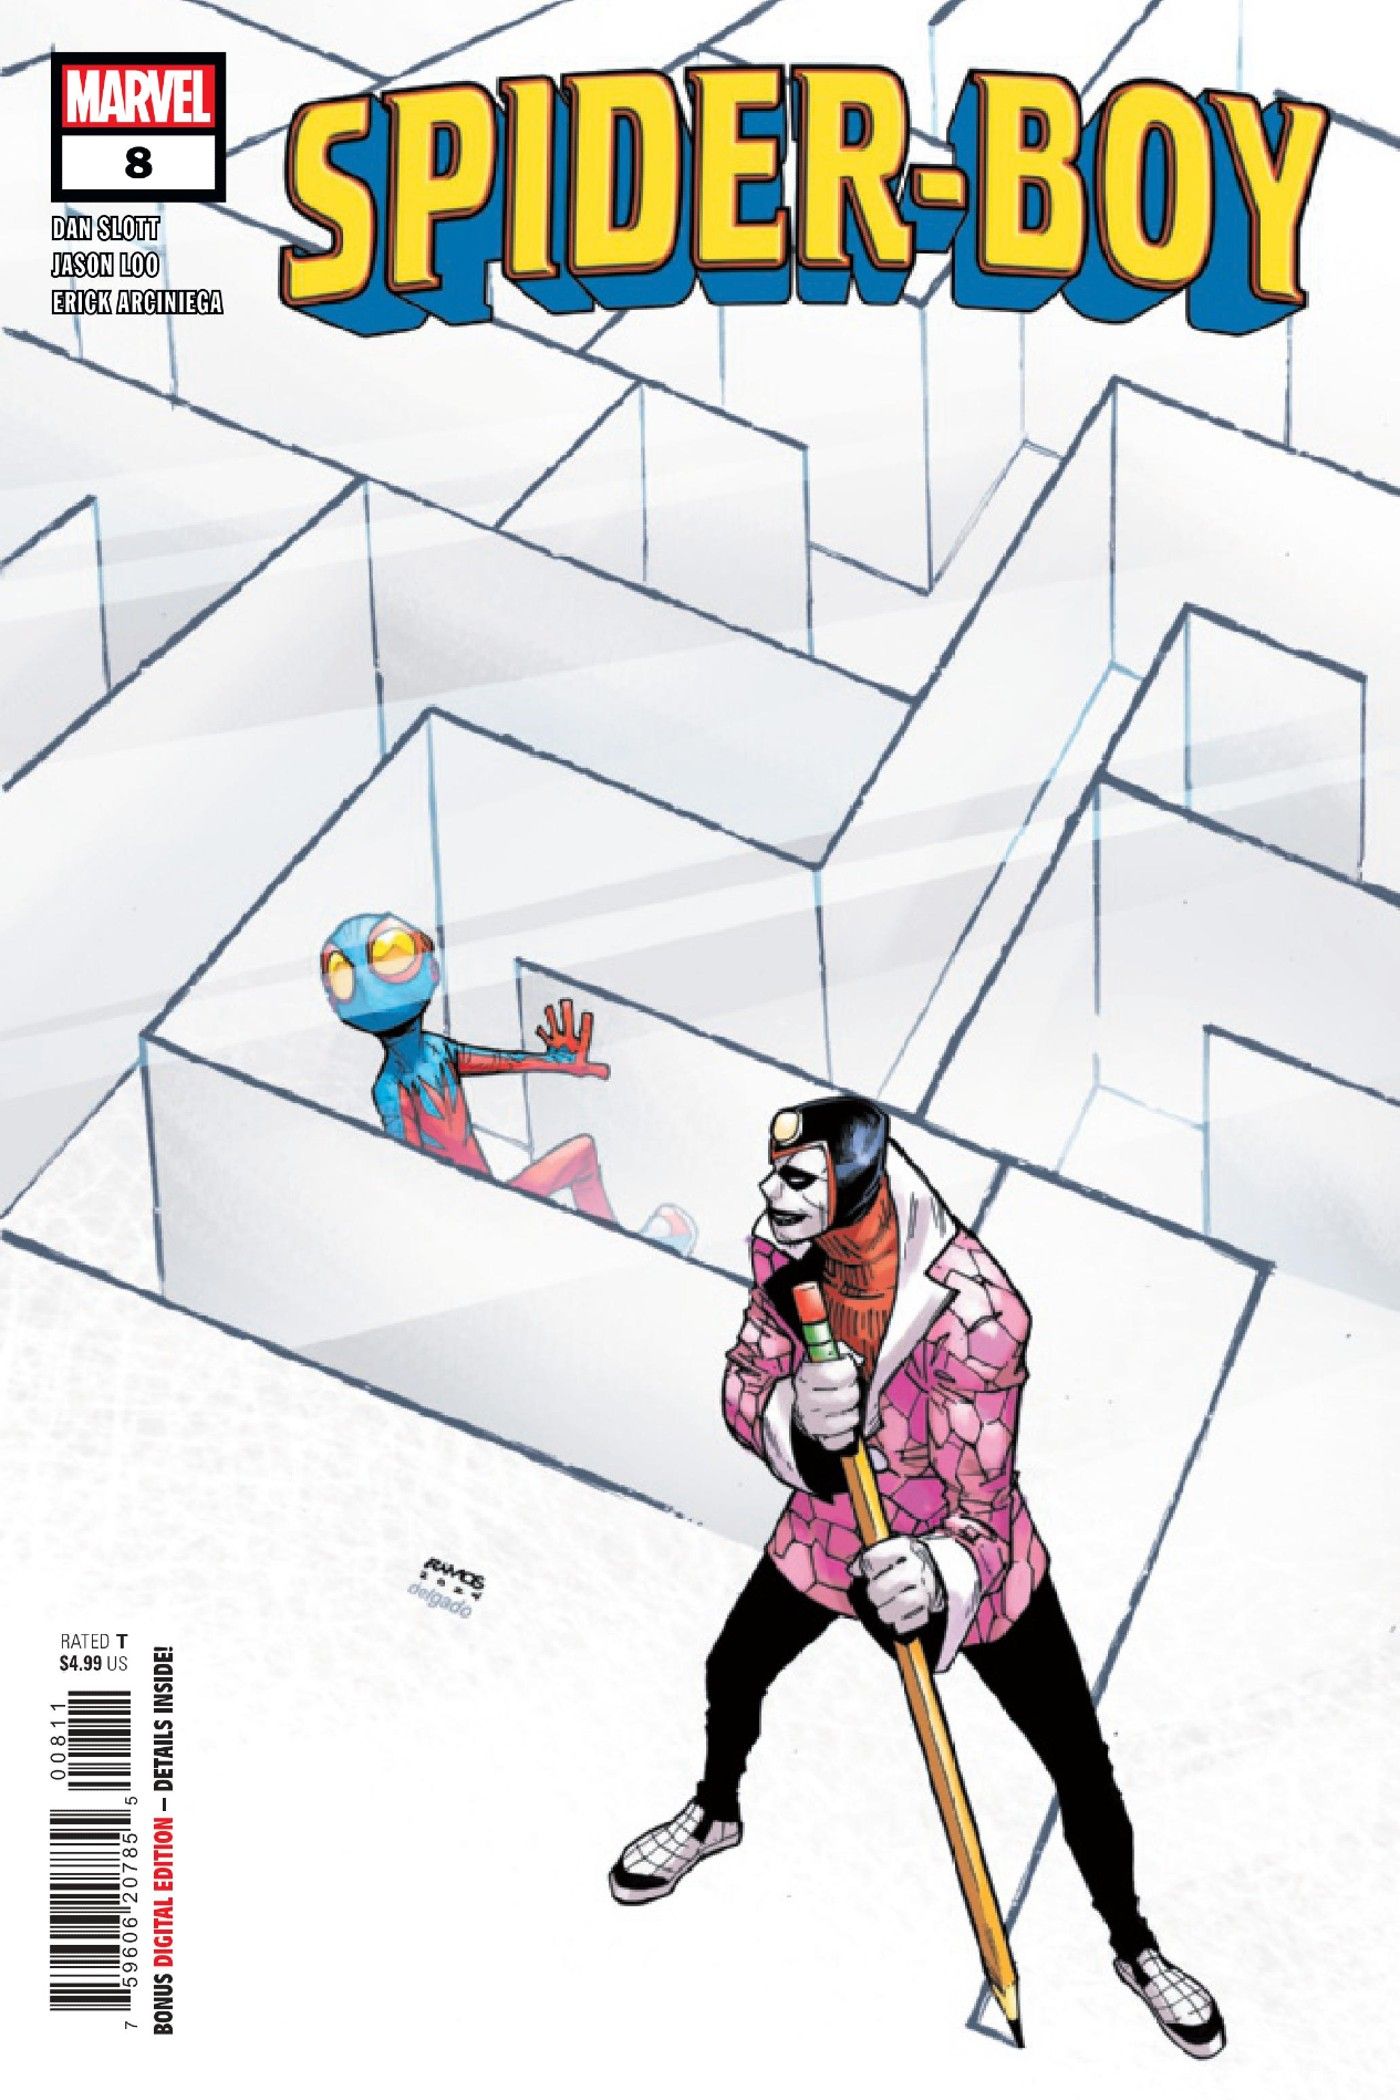 Spider-Boy #8 cover art, Spider-Boy stuck in a maze as Puzzle Man looks on.